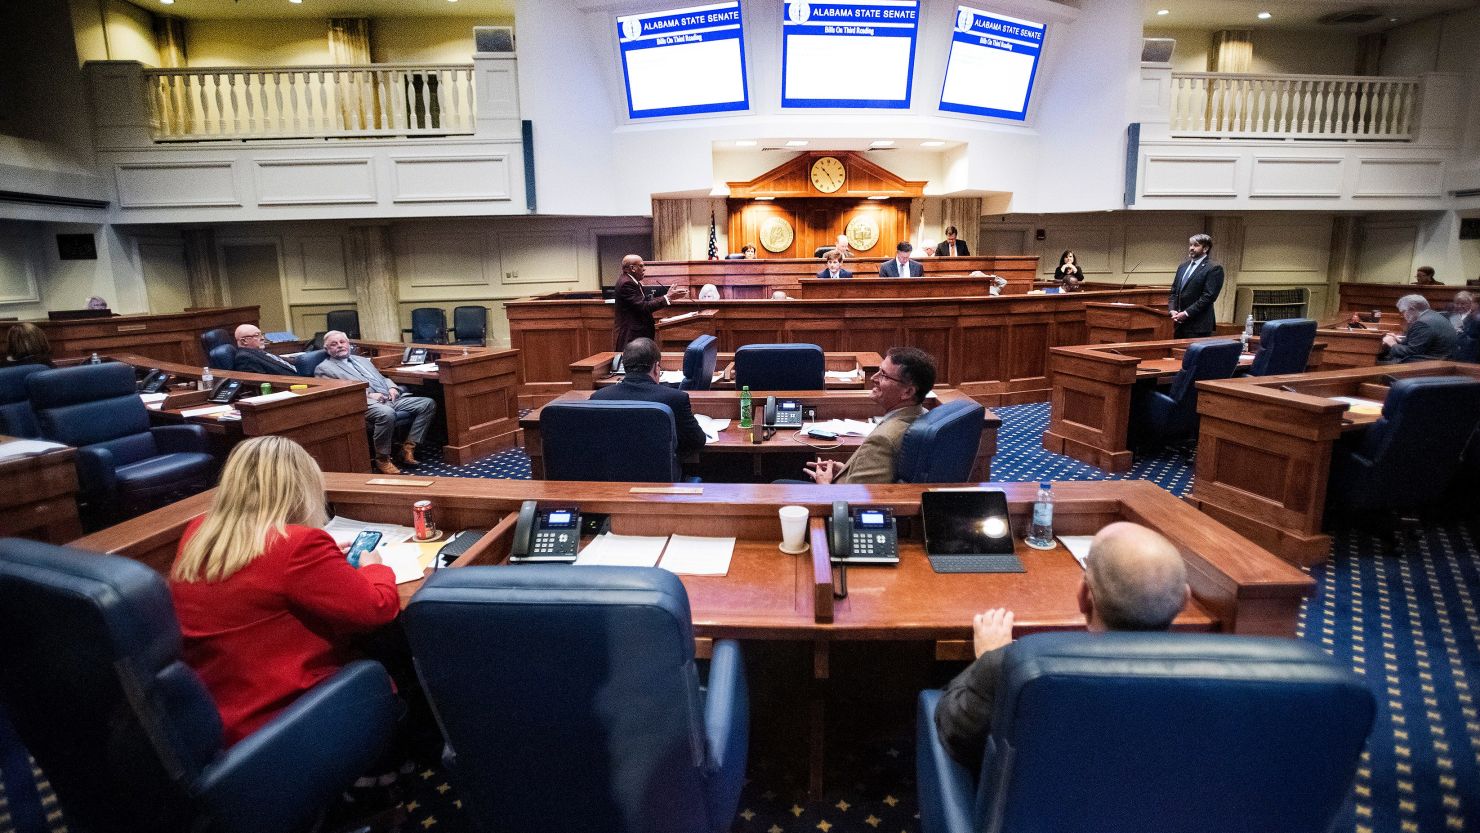 Sen. Shay Shelnutt, seated at center, listening to debate on transgender bills in the senate chamber at the Alabama Statehouse in Montgomery, Alabama, on Thursday April 7, 2022.